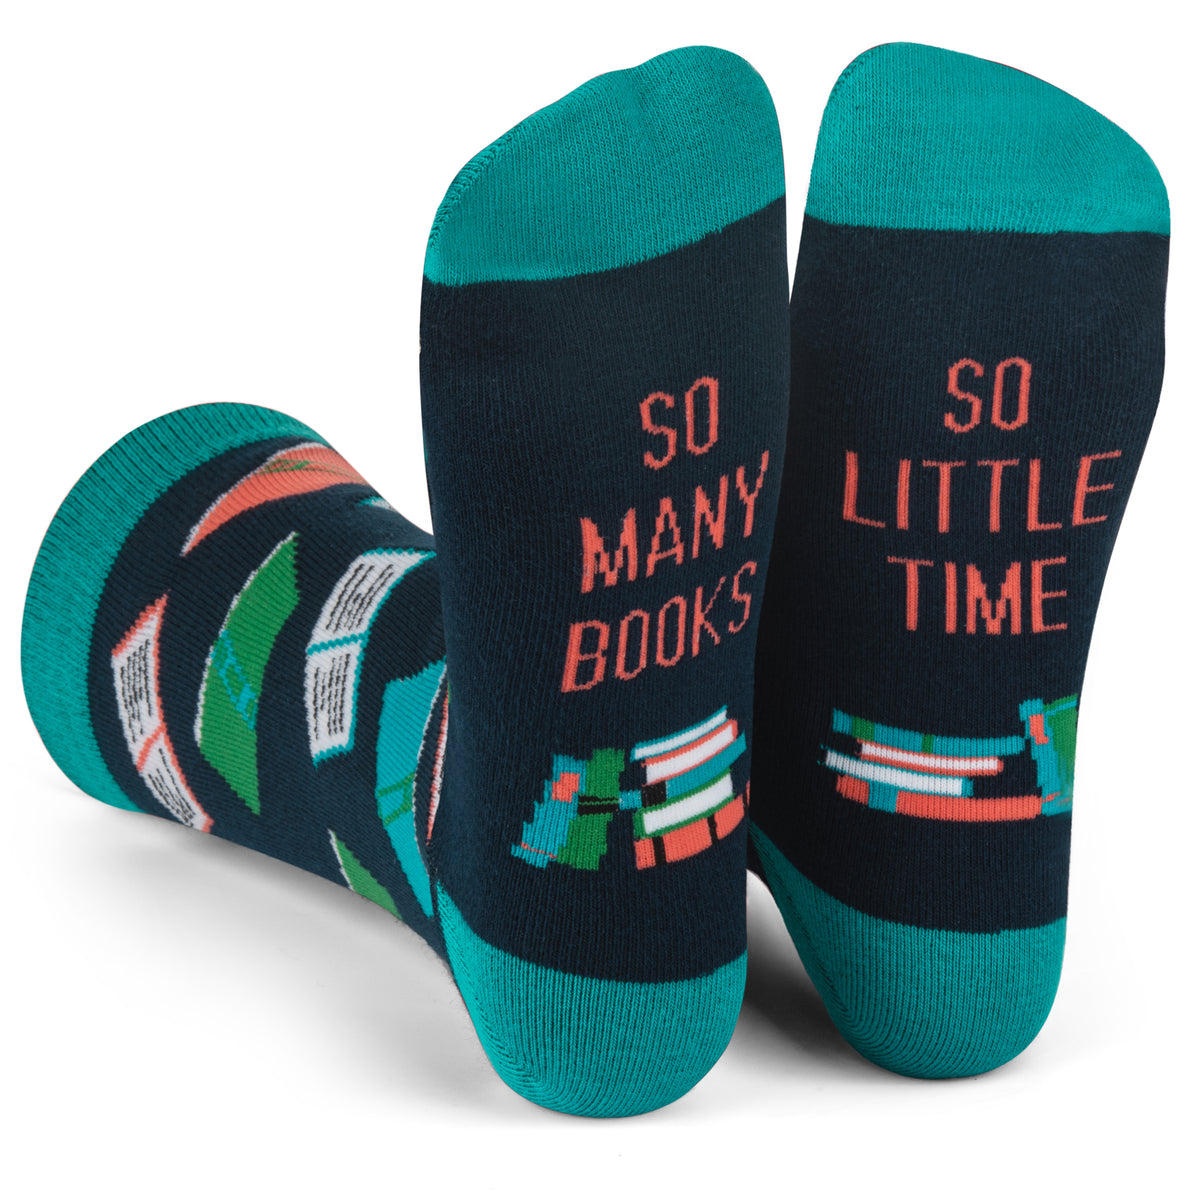 Reading Gifts, Funny Socks for Women, Cool Book Socks, Silly Socks, Thank You Gift Ideas for Her, Book Lovers Gifts, Reading Socks